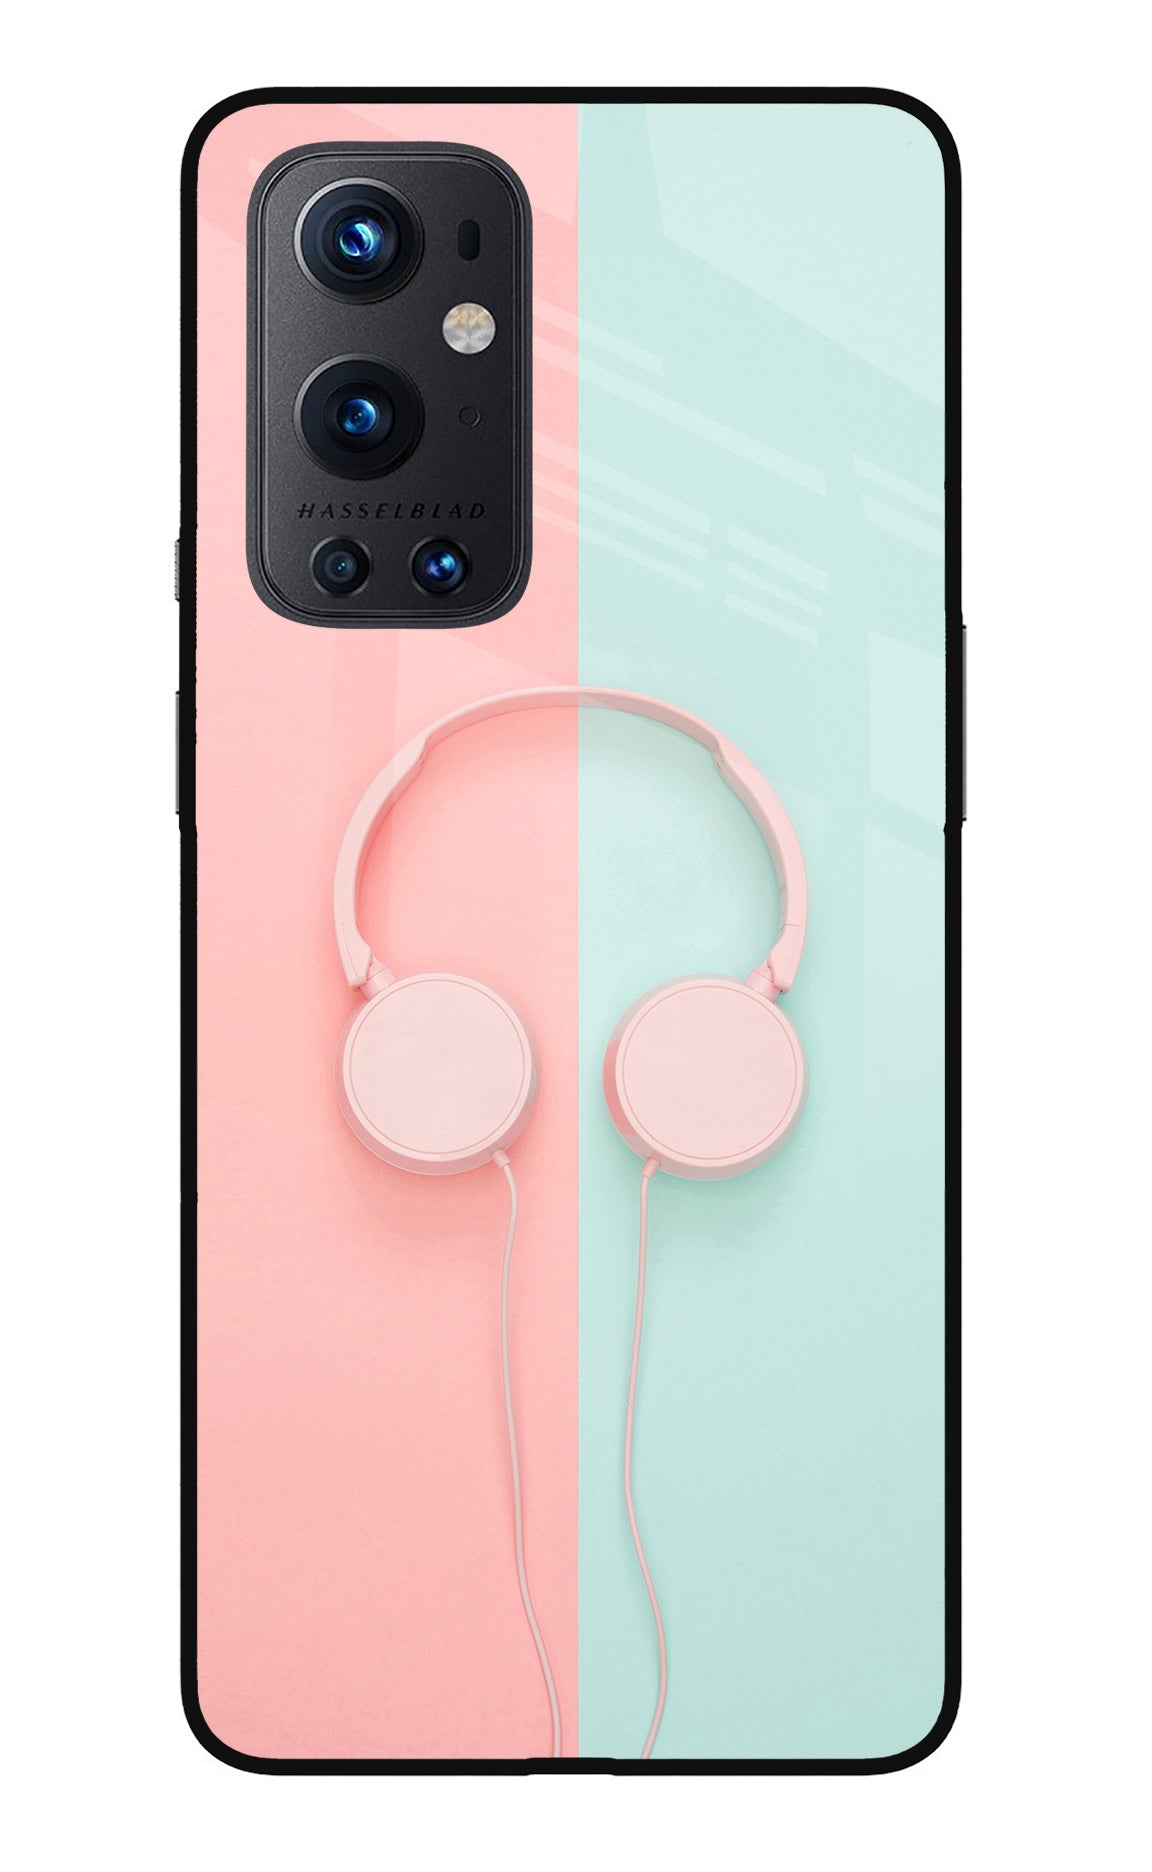 Music Lover Oneplus 9 Pro Back Cover